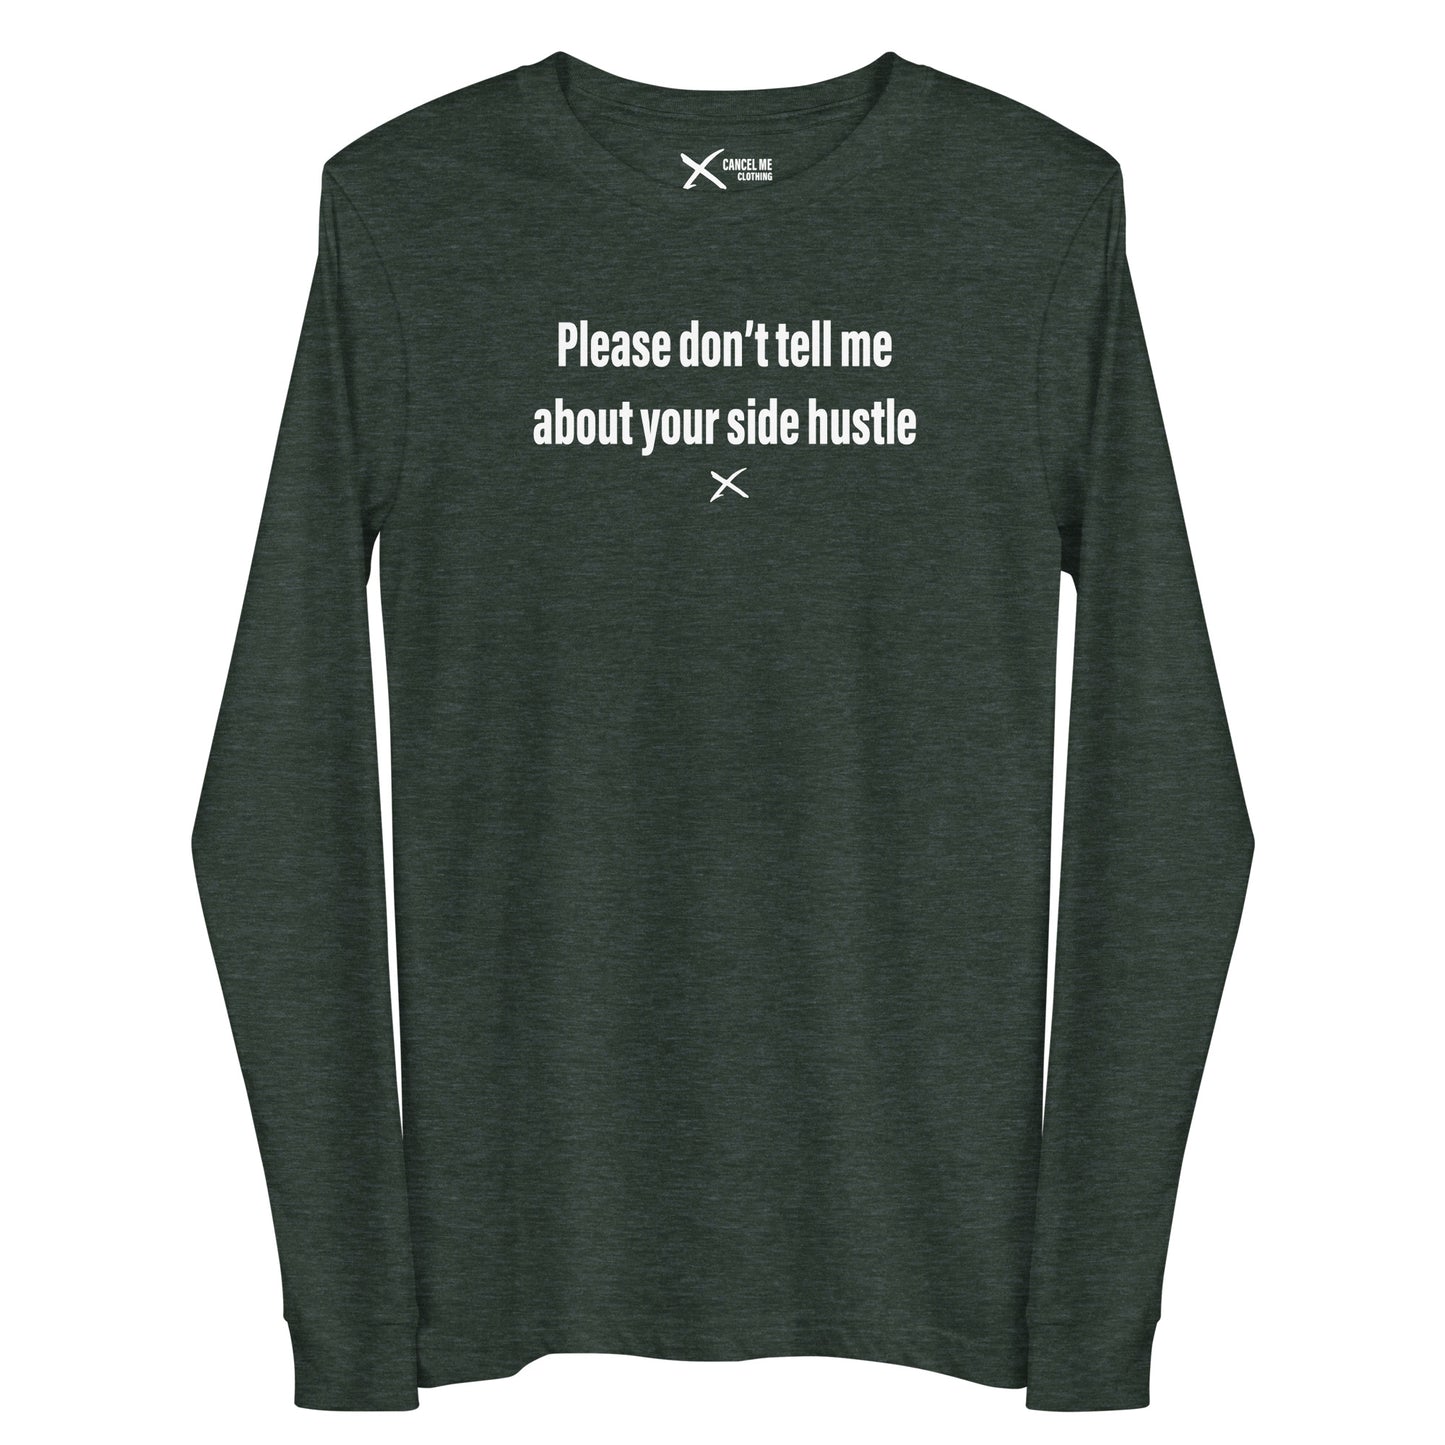 Please don't tell me about your side hustle - Longsleeve